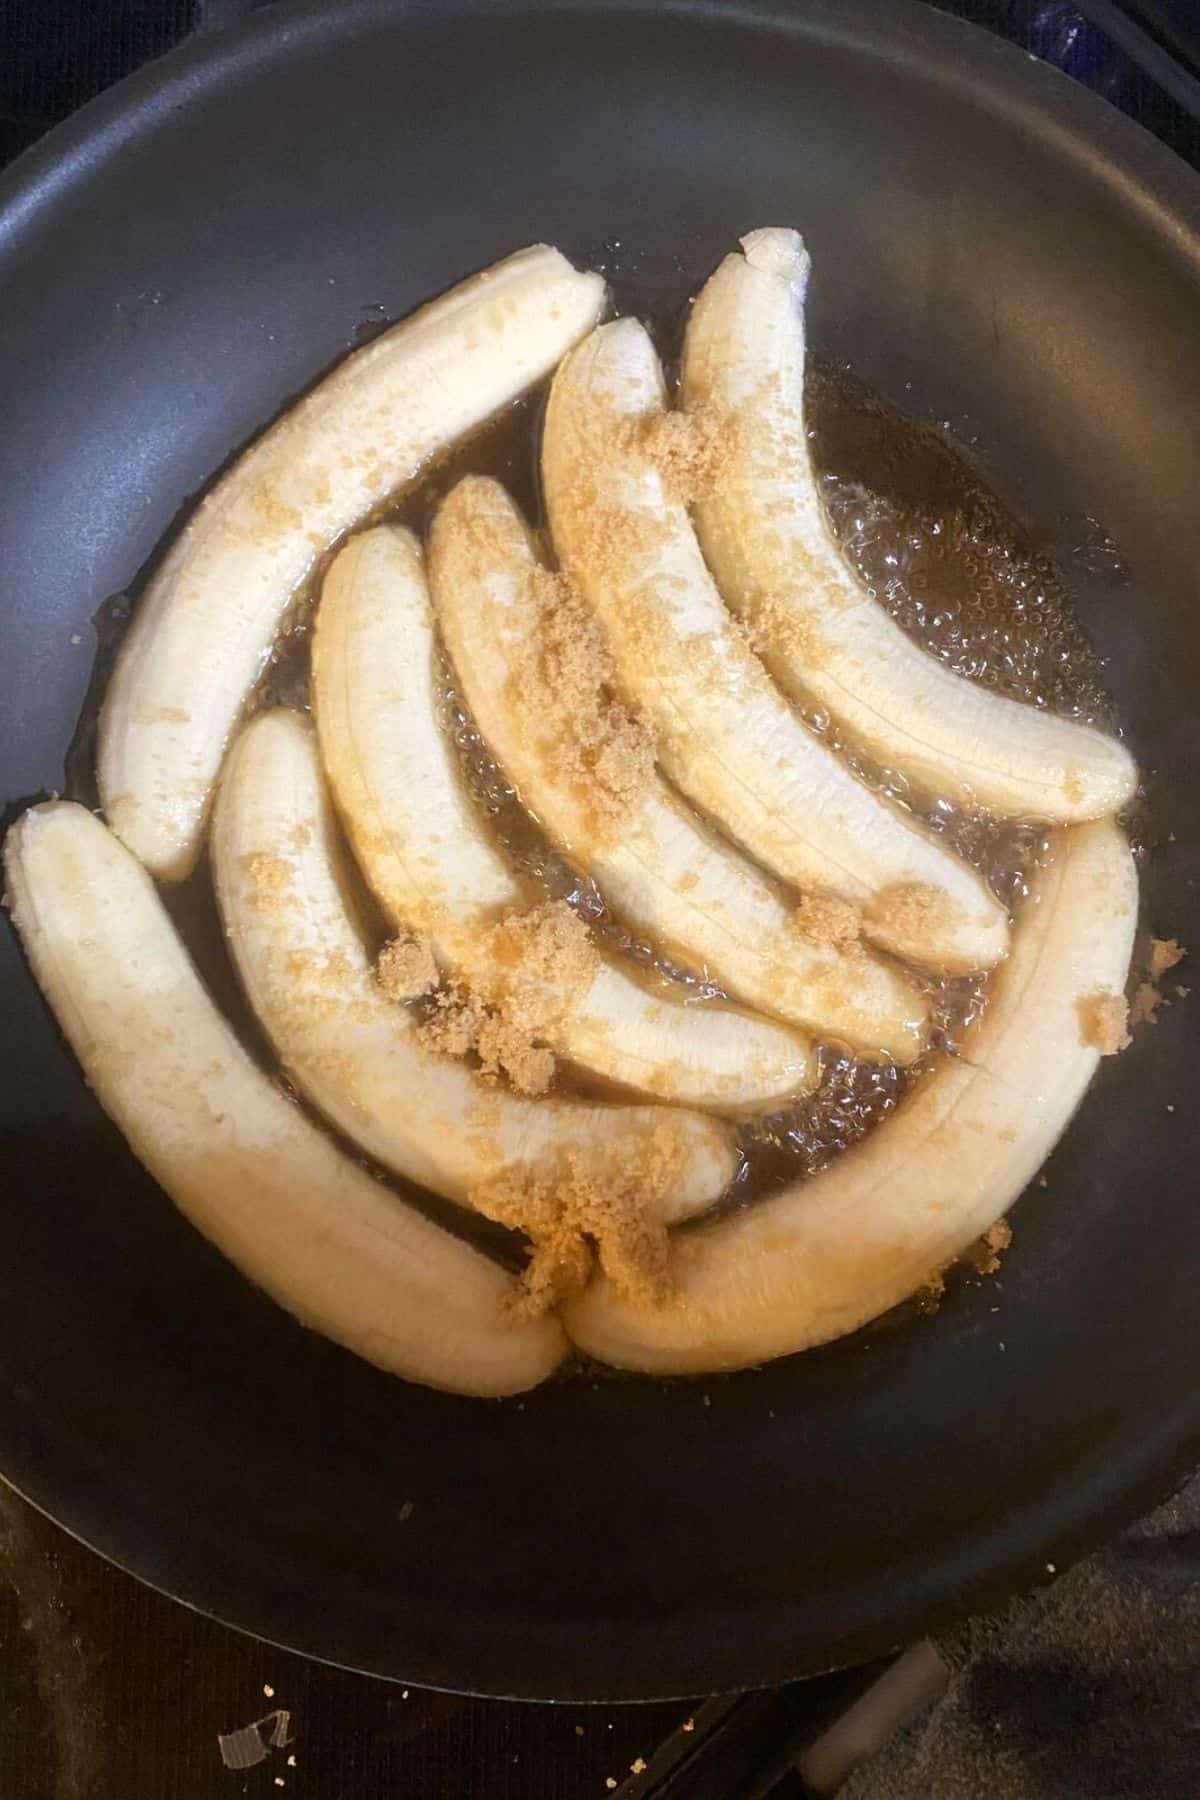 An overhead view of sliced bananas sitting in agave with brown sugar sprinkled on top